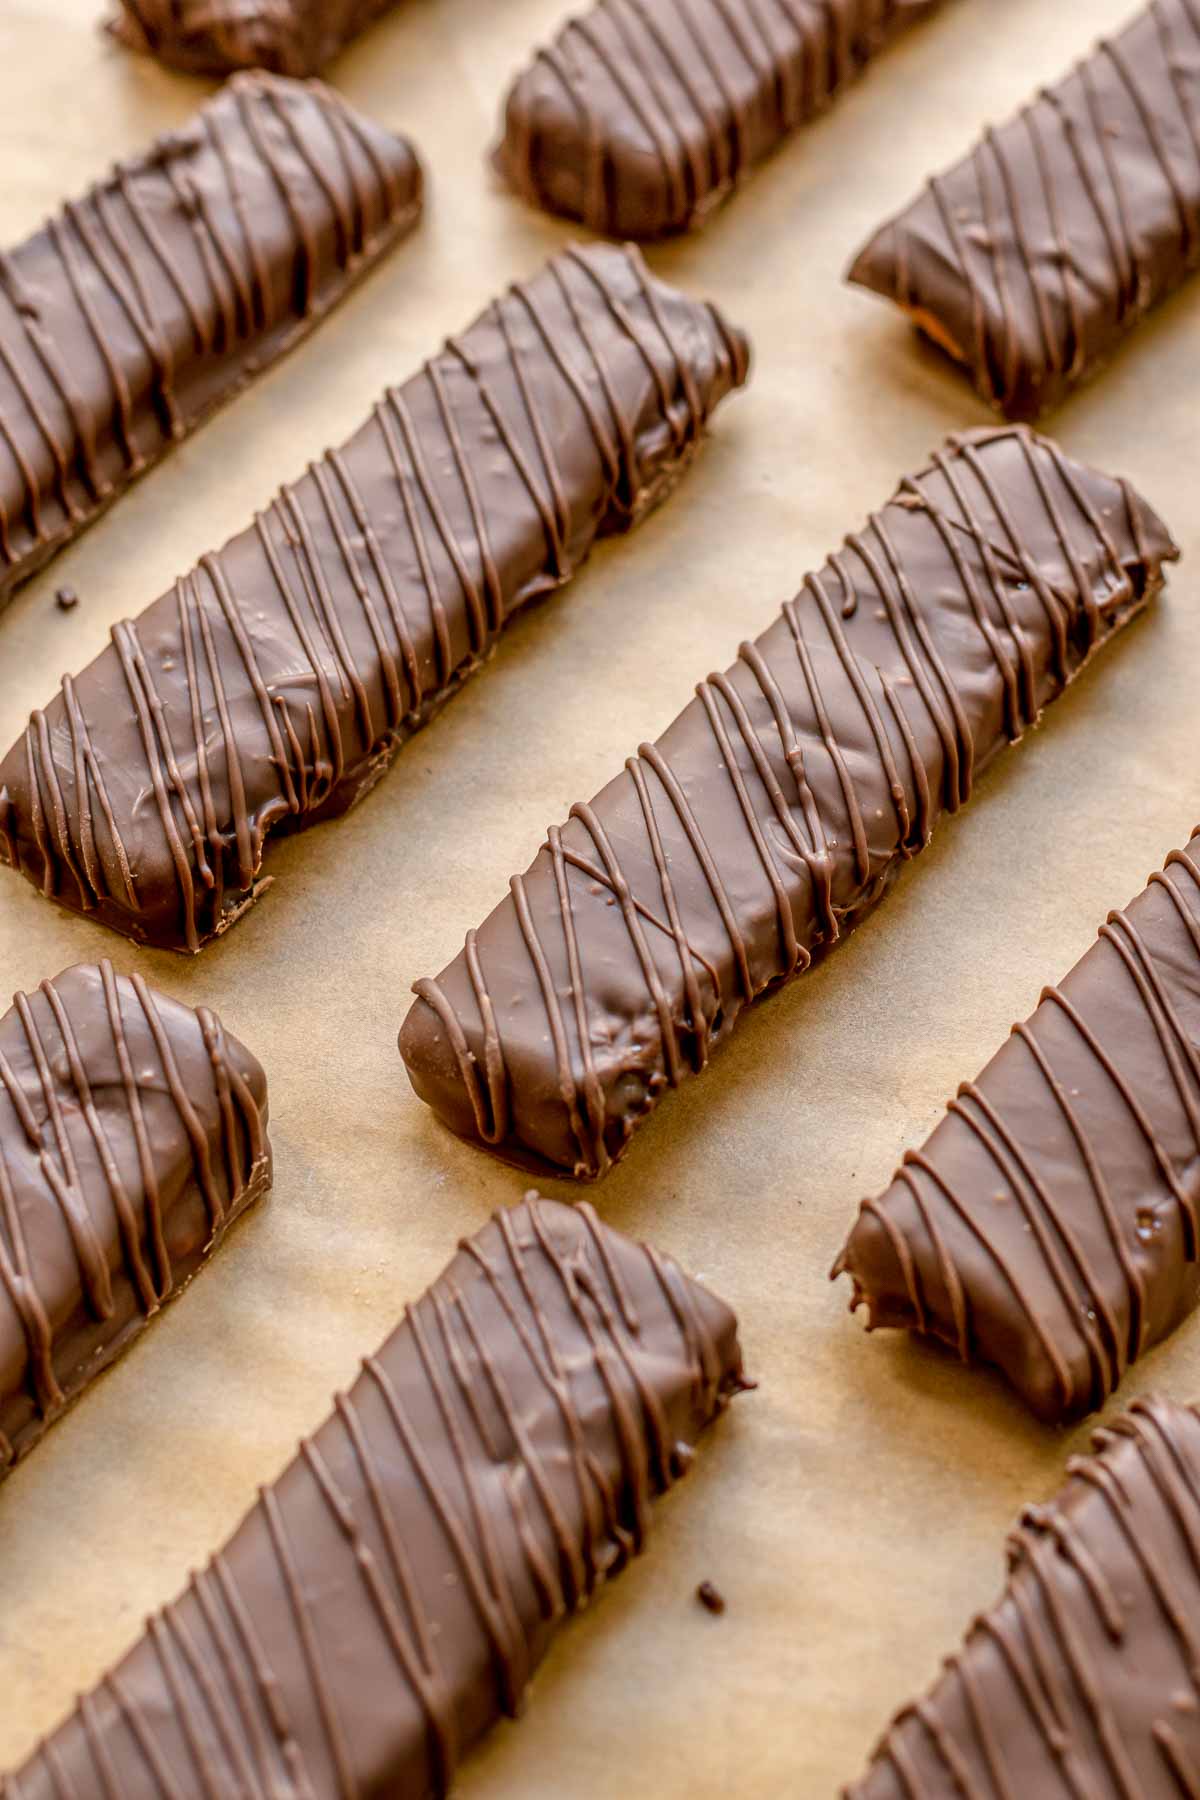 Butterfinger Bars lined up on parchment paper after adding chocolate drizzle